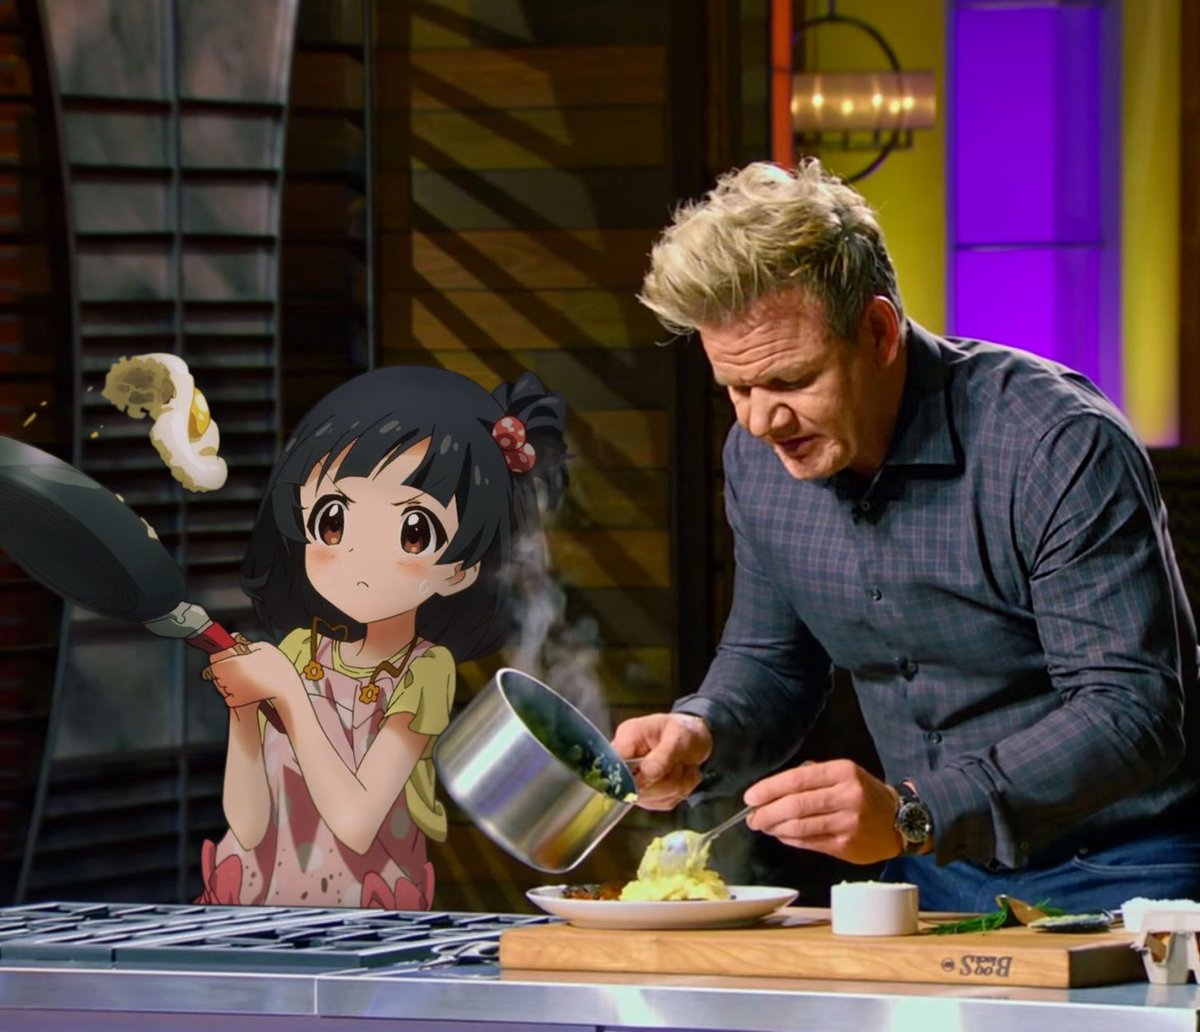 RT @WaifuAlert: Gordon Ramsay cooking with anime girls https://t.co/JhRftX0eJ5